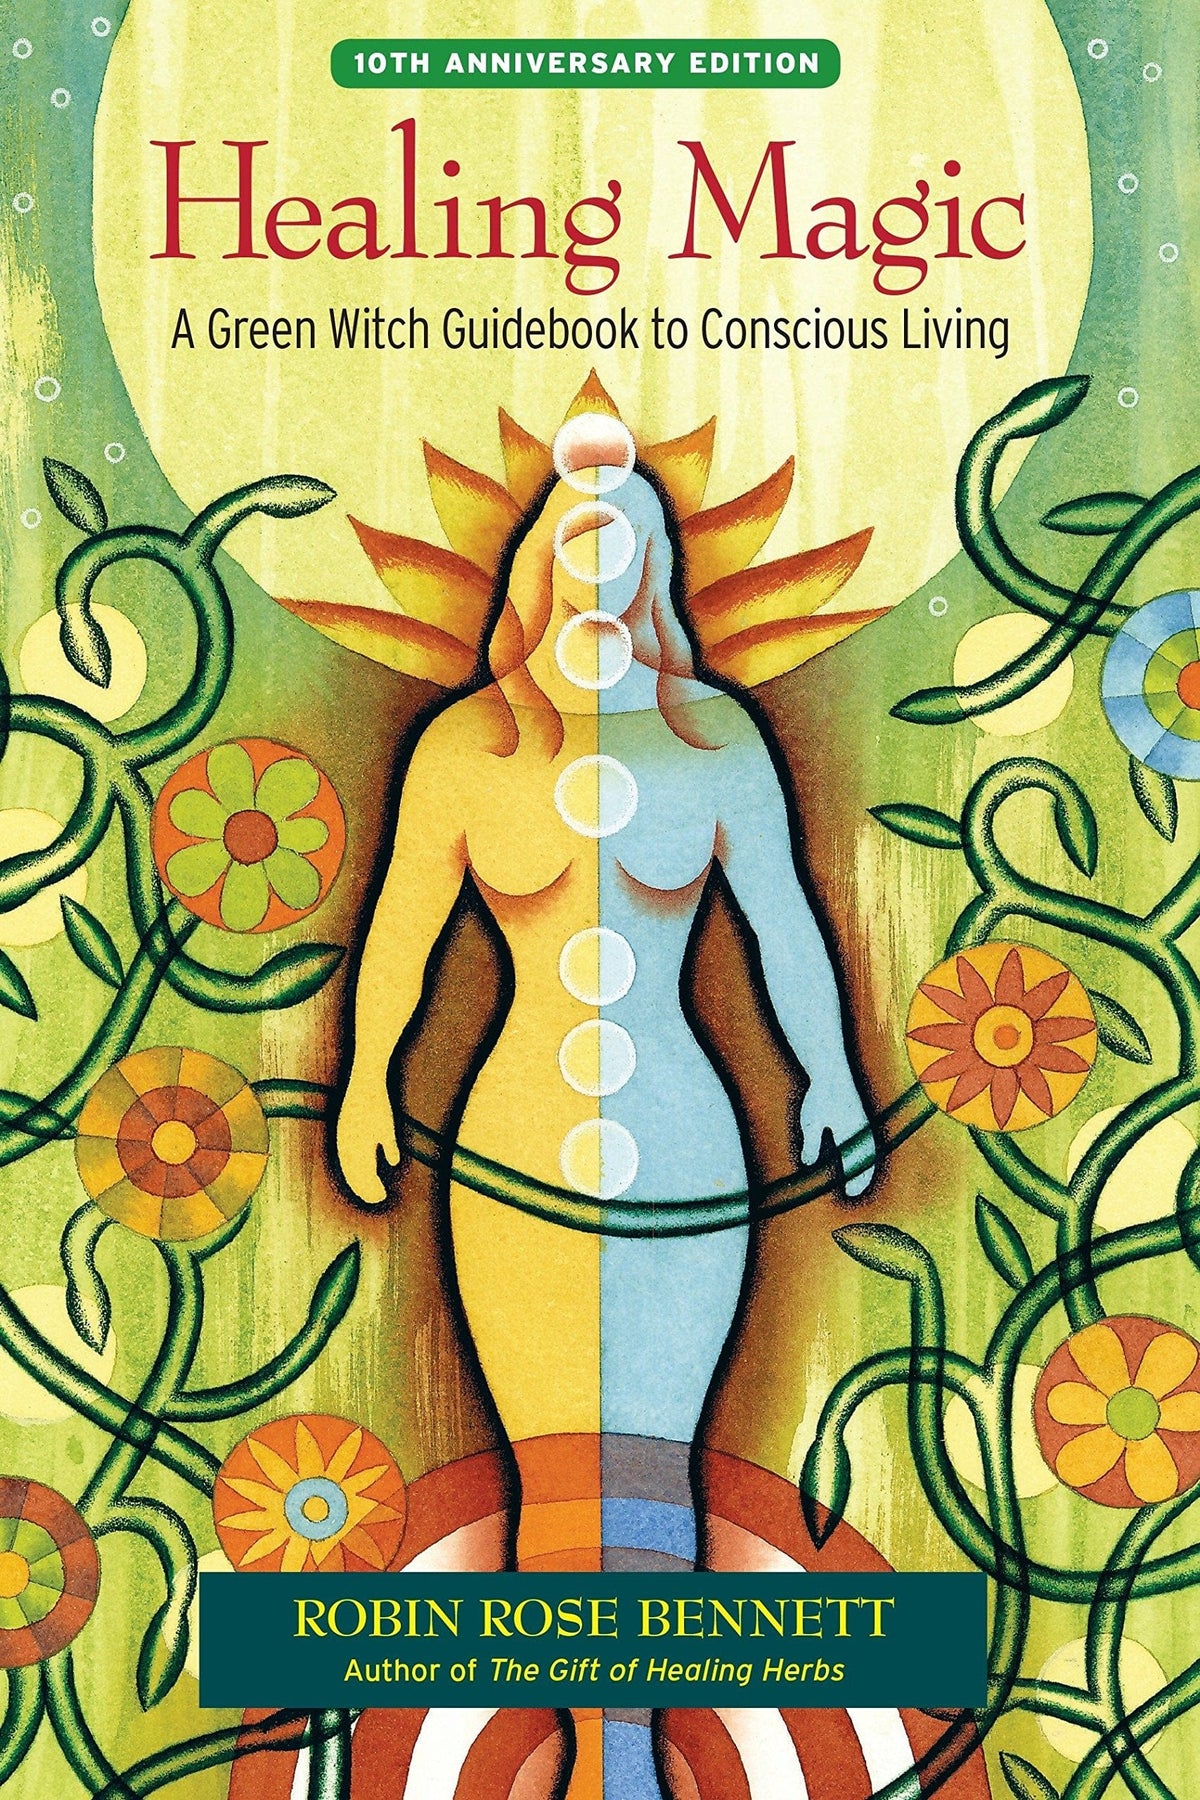 Healing Magic: Green Witch Guidebook to Conscious Living - 10th Anniversary Edition - Third Eye